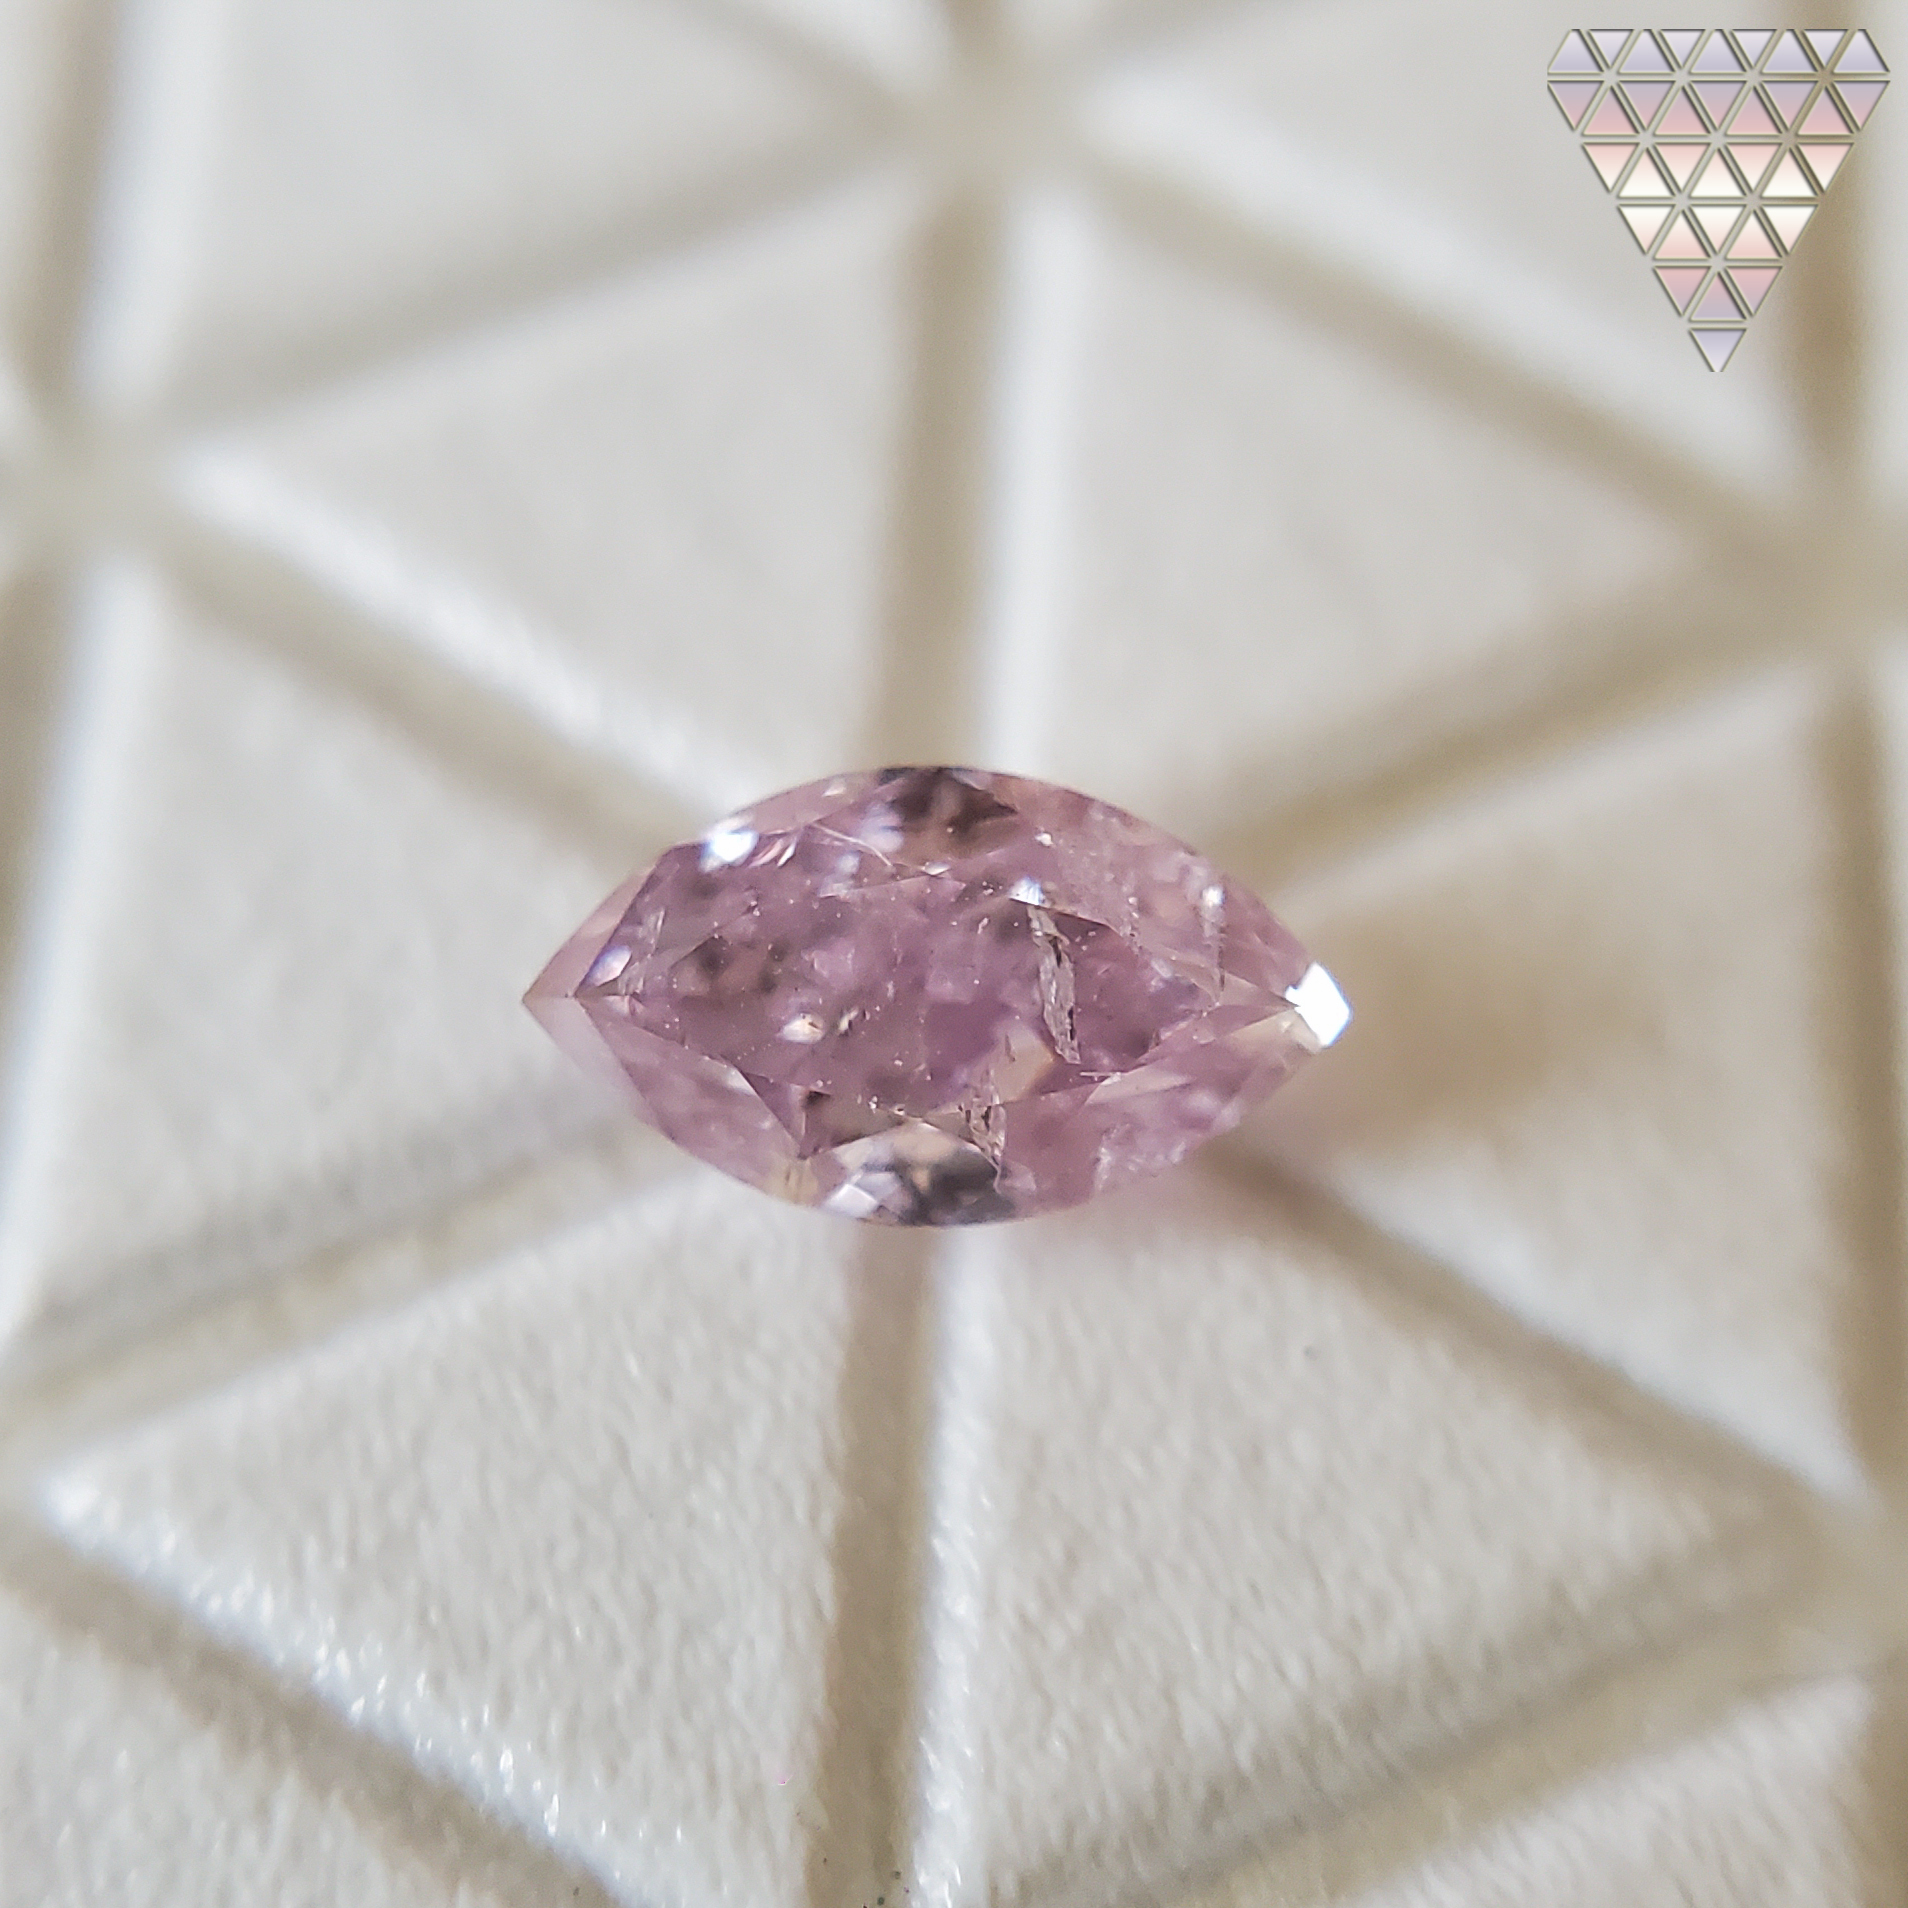 0.114 Ct Fancy Purple Pink I2 Marquise AGT Japan Natural Loose Diamond Exchange Federation 3